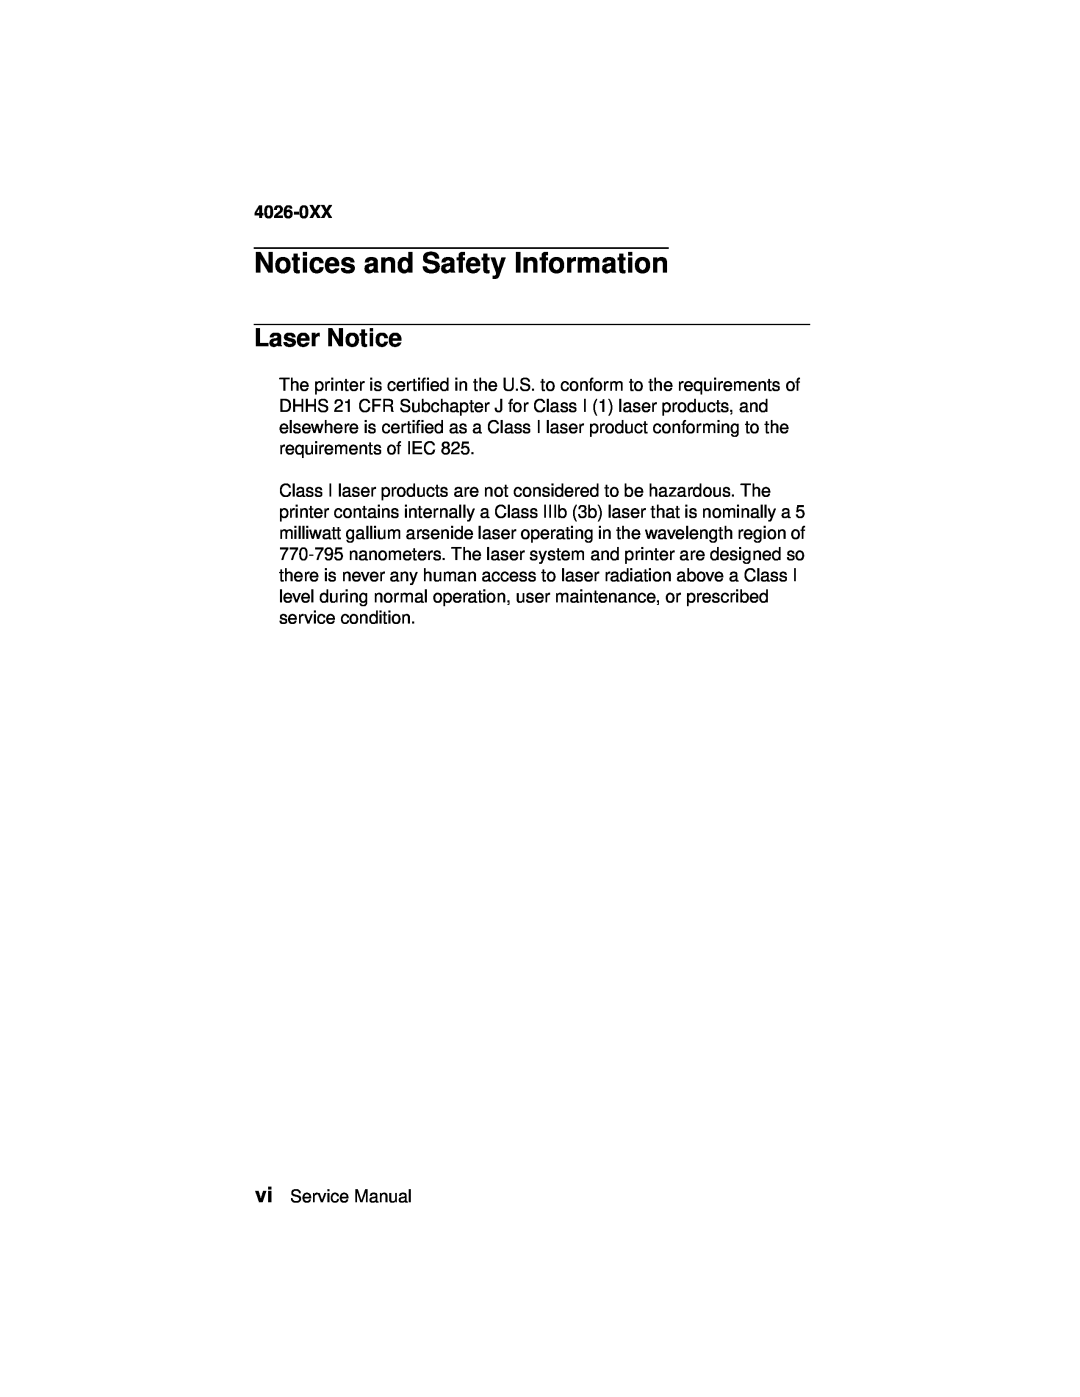 Lexmark 4026-0XX manual Notices and Safety Information, Laser Notice 